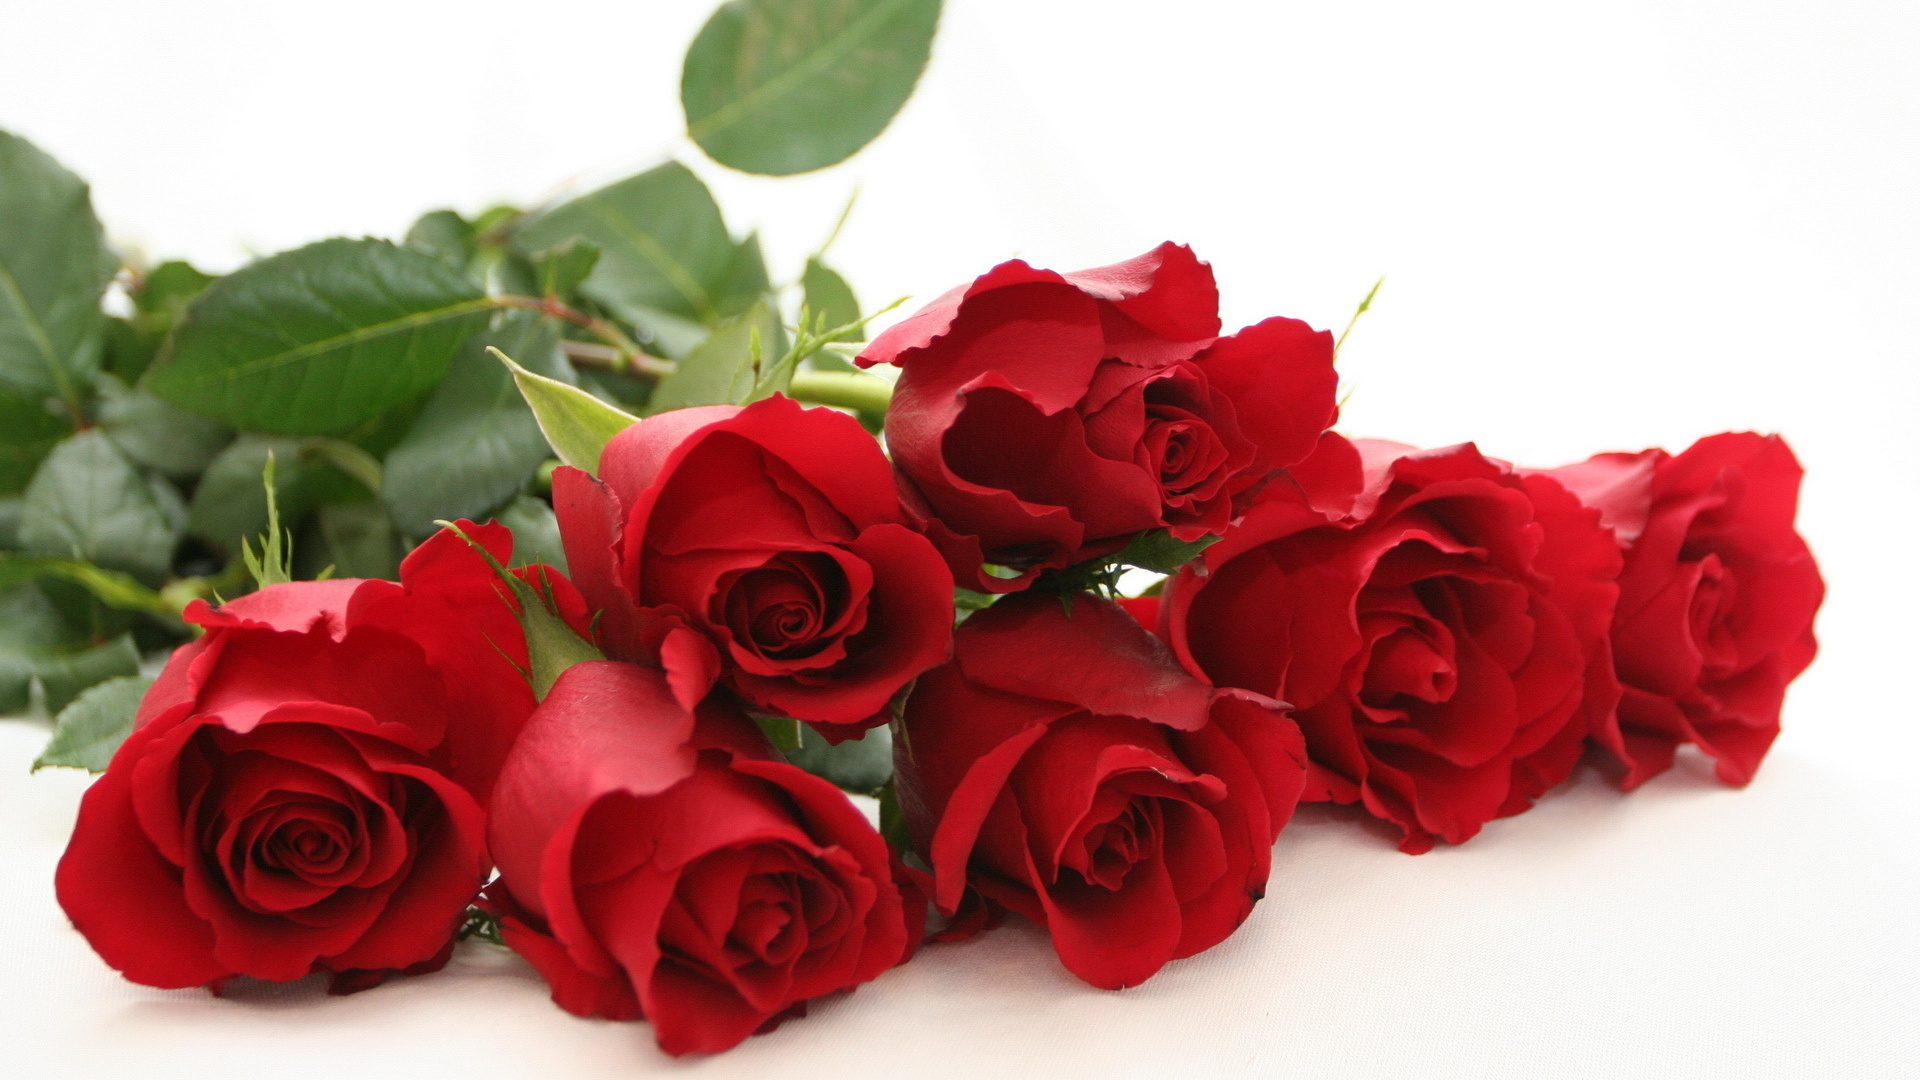 Nature___Flowers_Red_roses_on_a_white_table_on_a_white_background_056460_.jpg